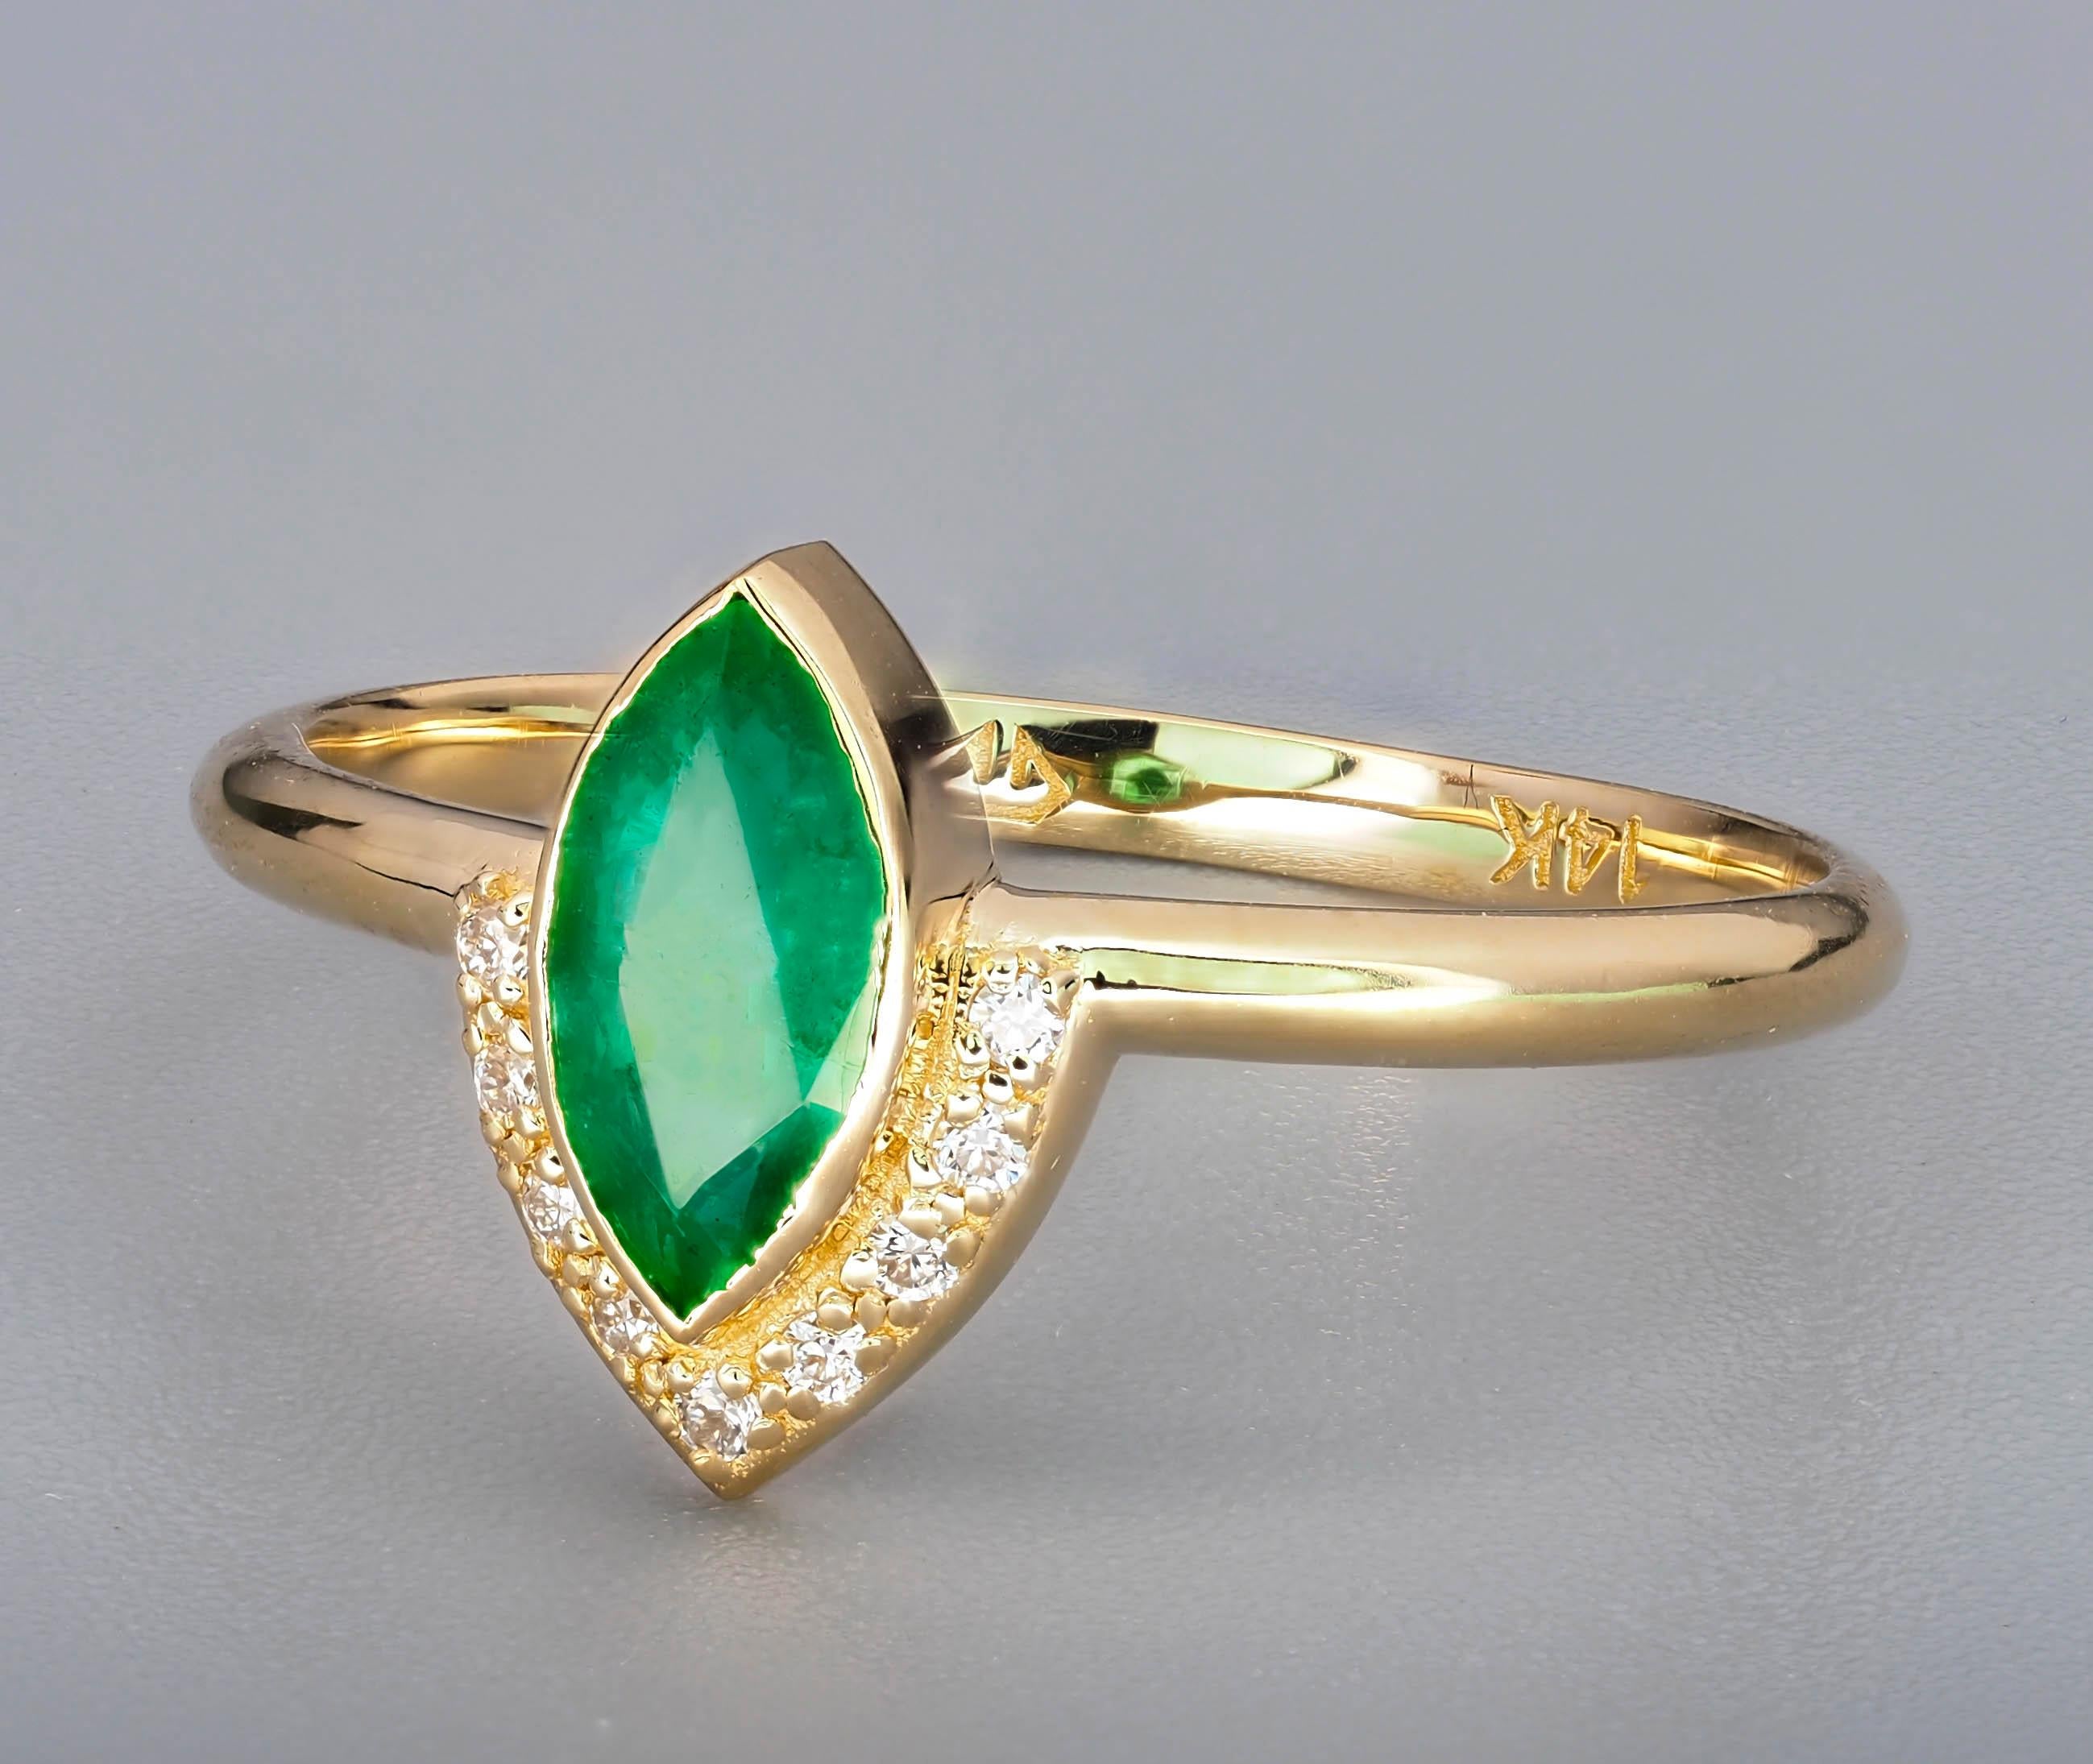 For Sale:  14 K Gold Ring with Marquise Cut Emerald and Diamonds 6